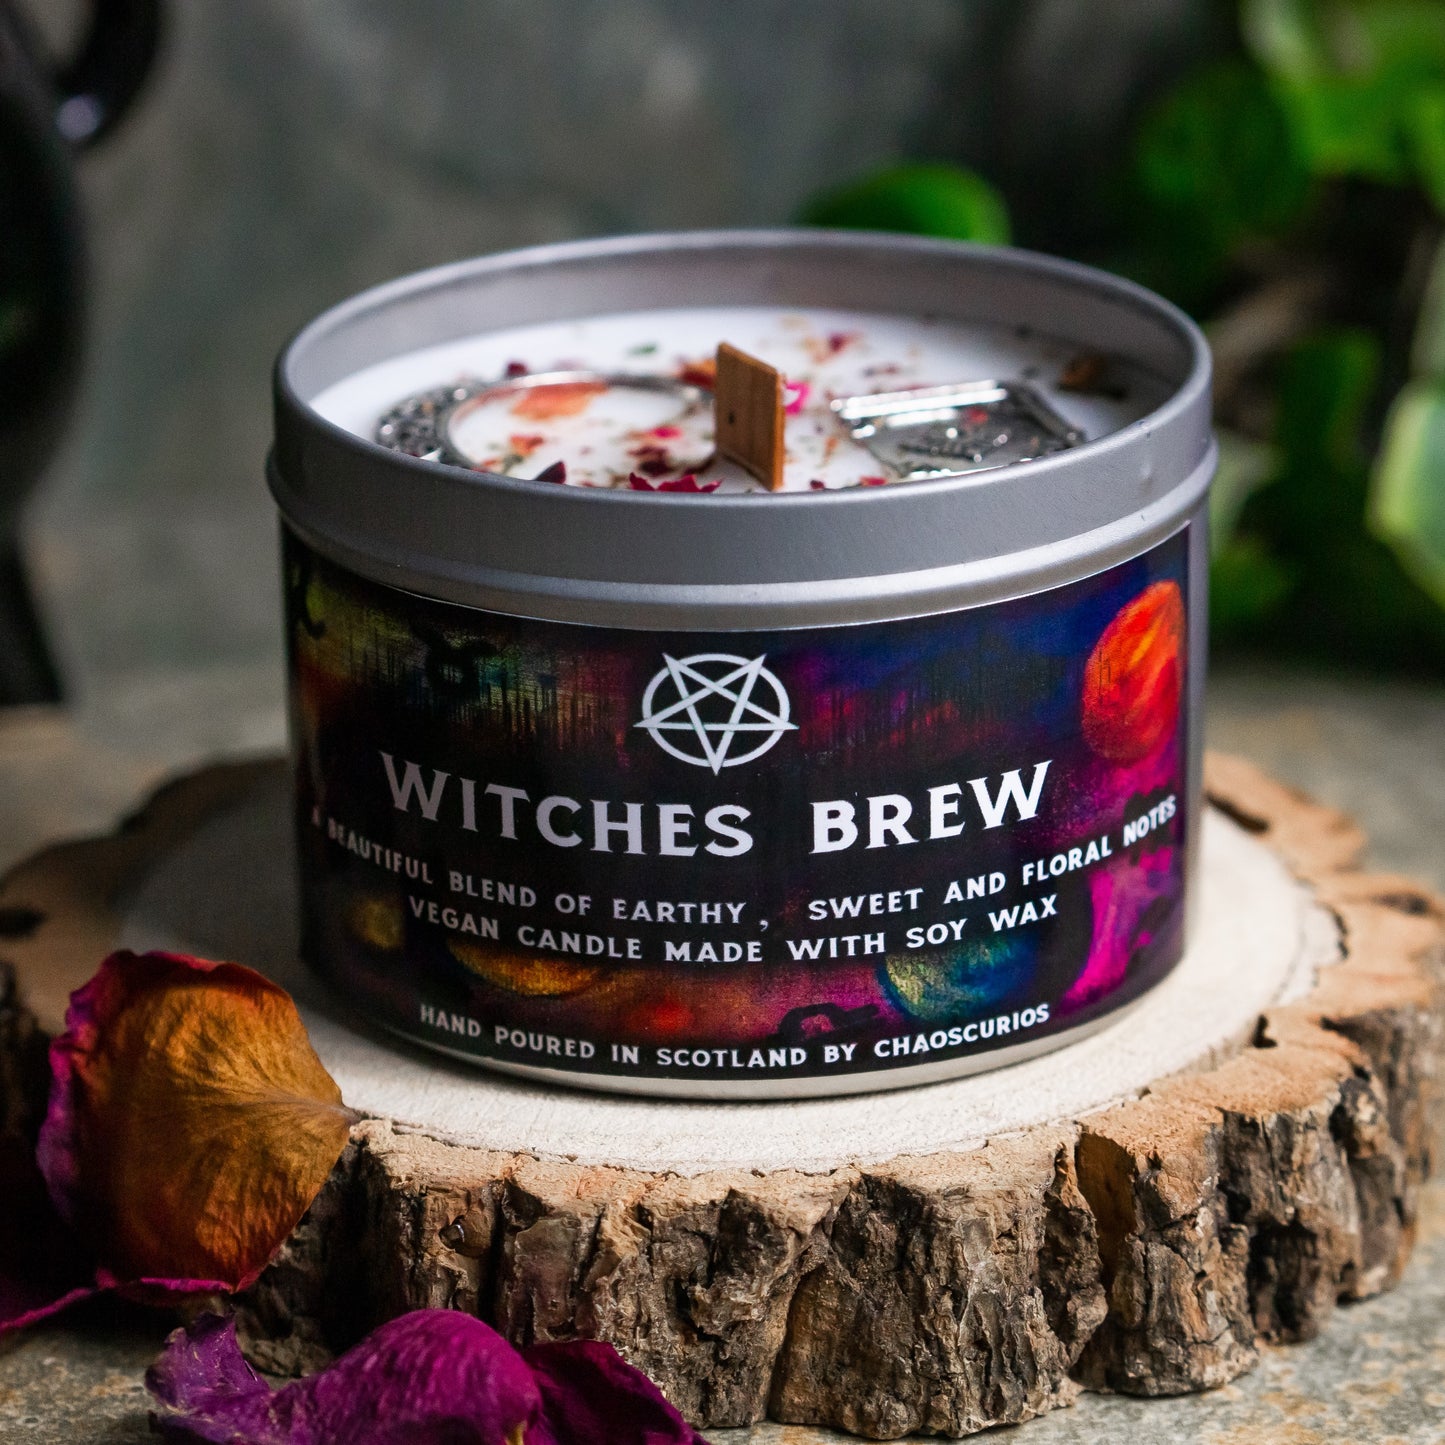 Witches Brew, Vegan Soy Candle, Witchy Aesthetic, Witchy Vibes, Pentacle Candle, Moon Candle, Book of Spells